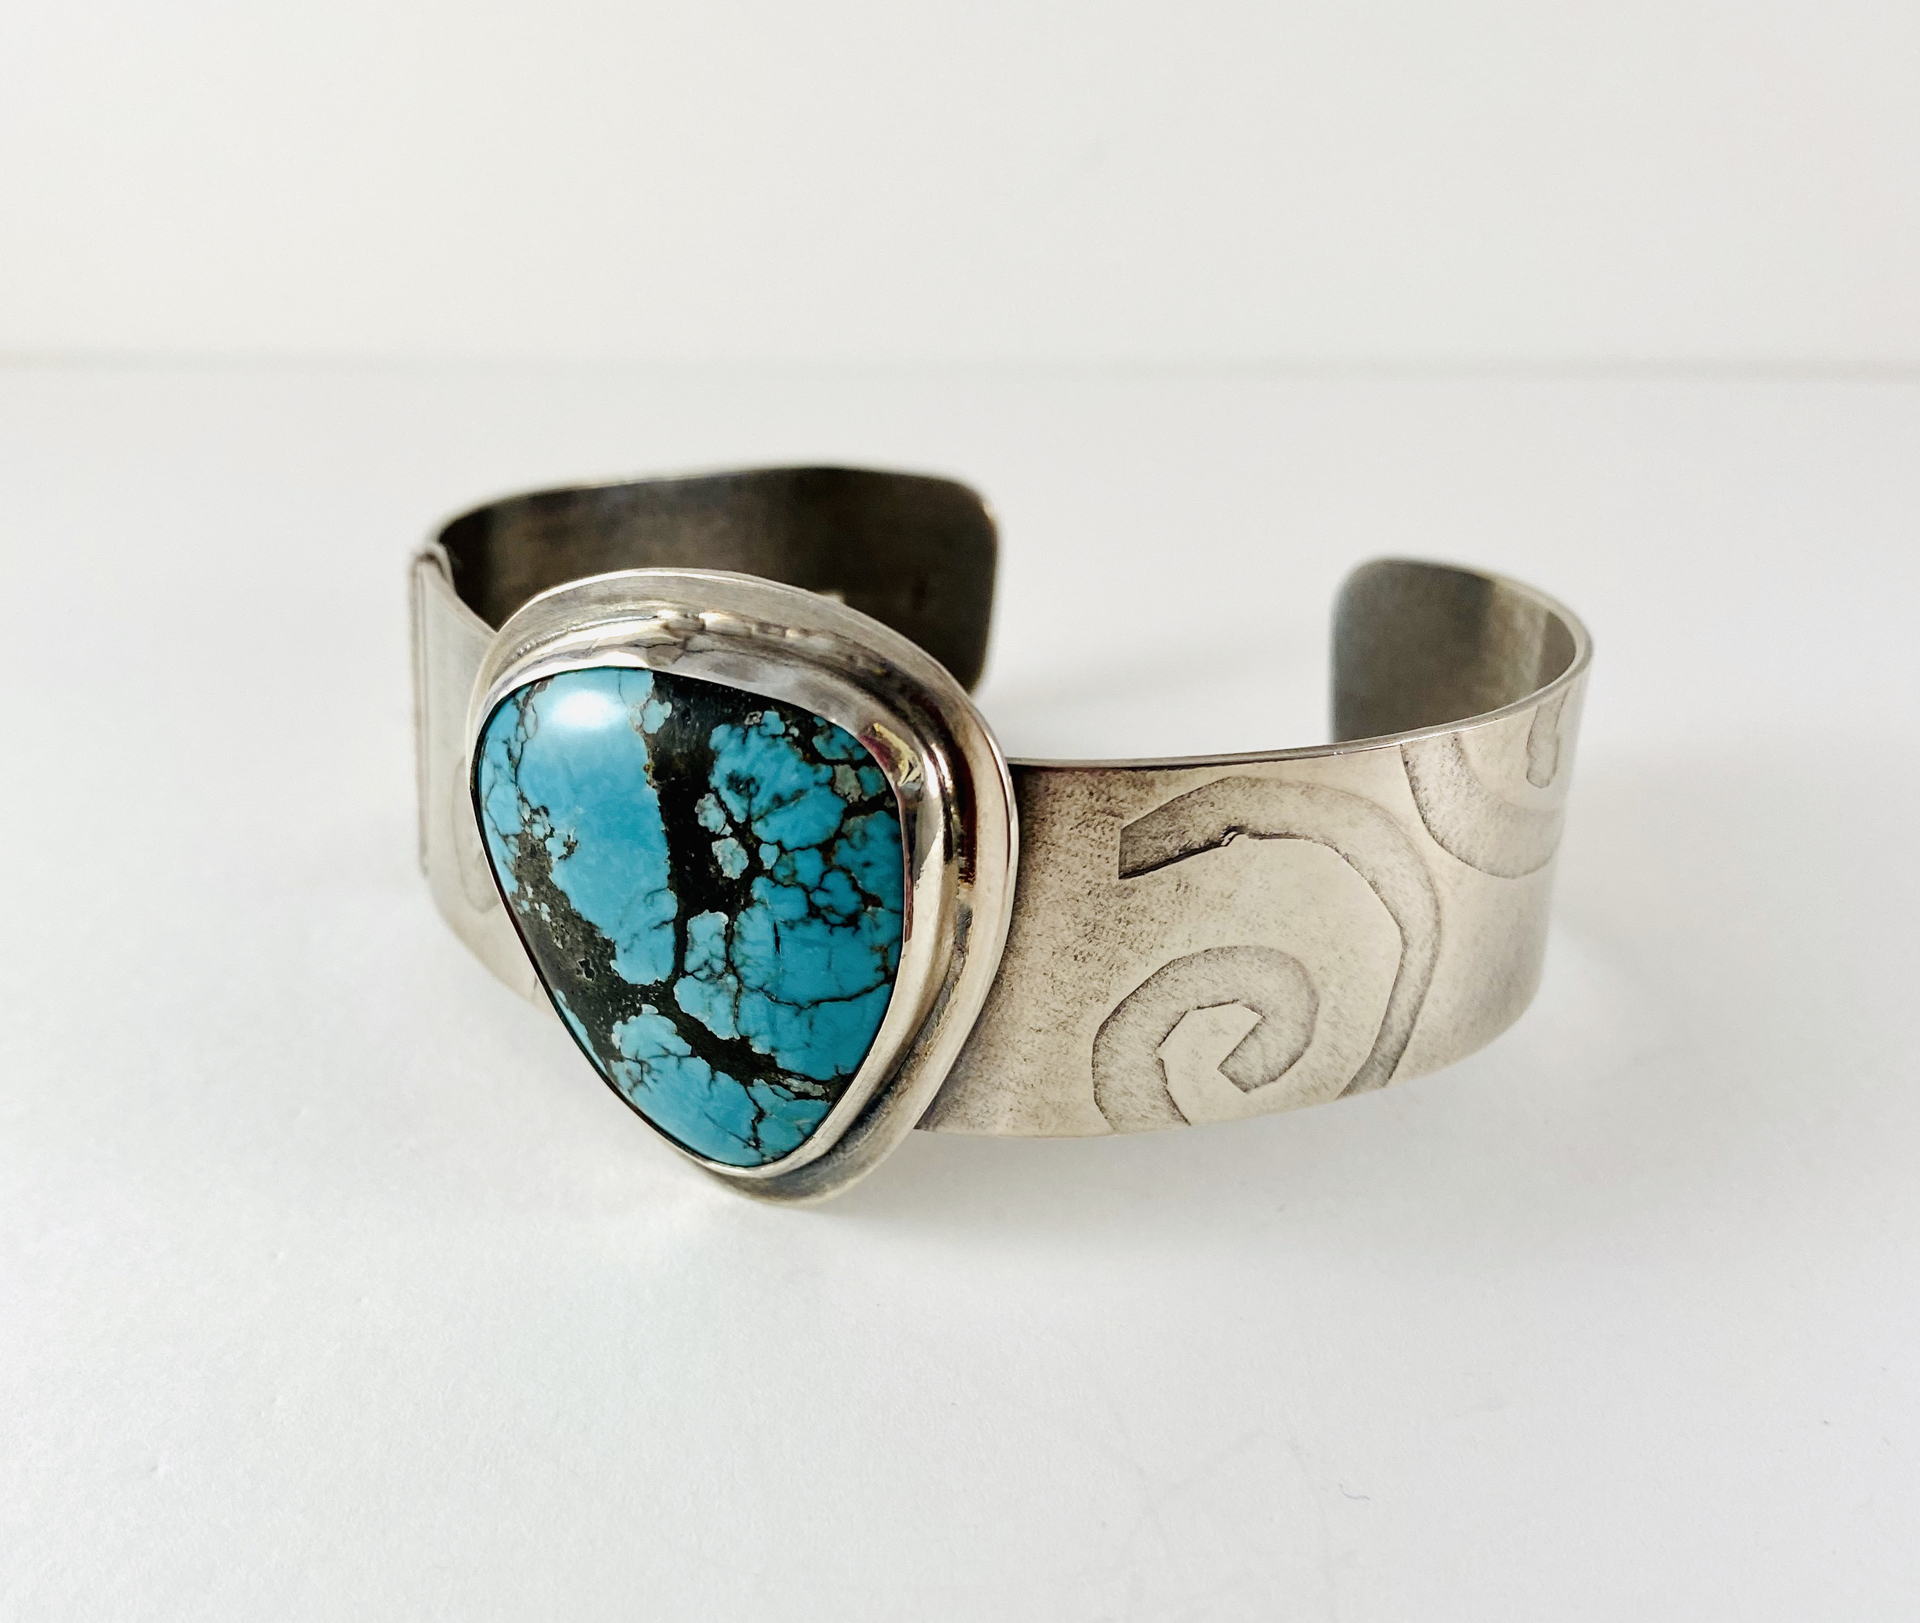 Spiderweb Turquoise Hand Textured Sterling Cuff Bracelet AB19-6 by Anne Bivens